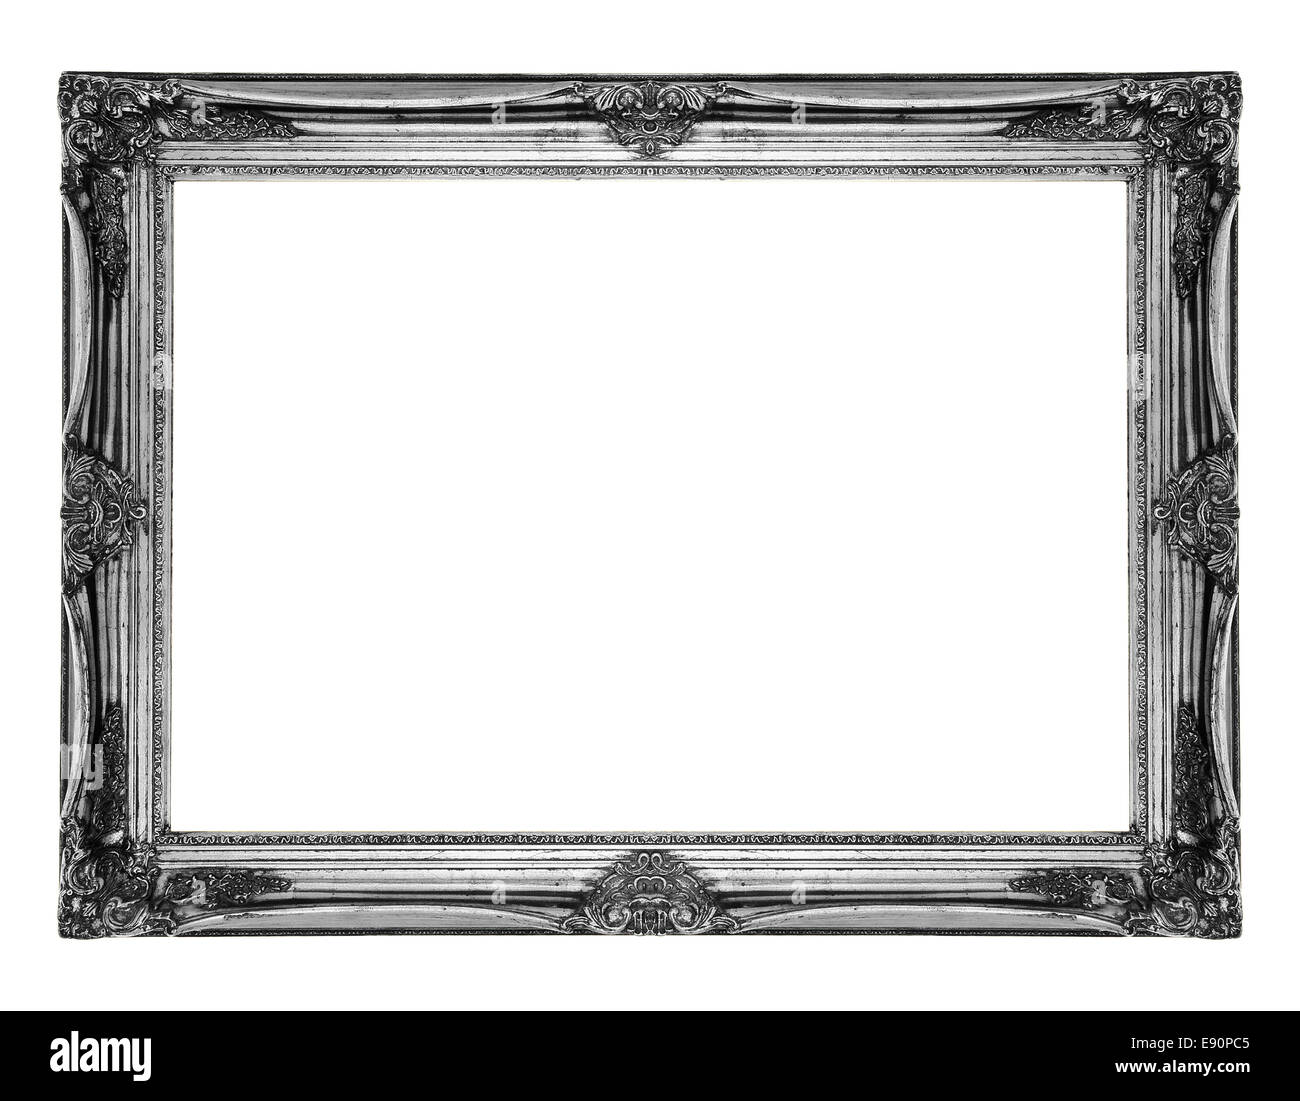 Antique old frame Stock Photo